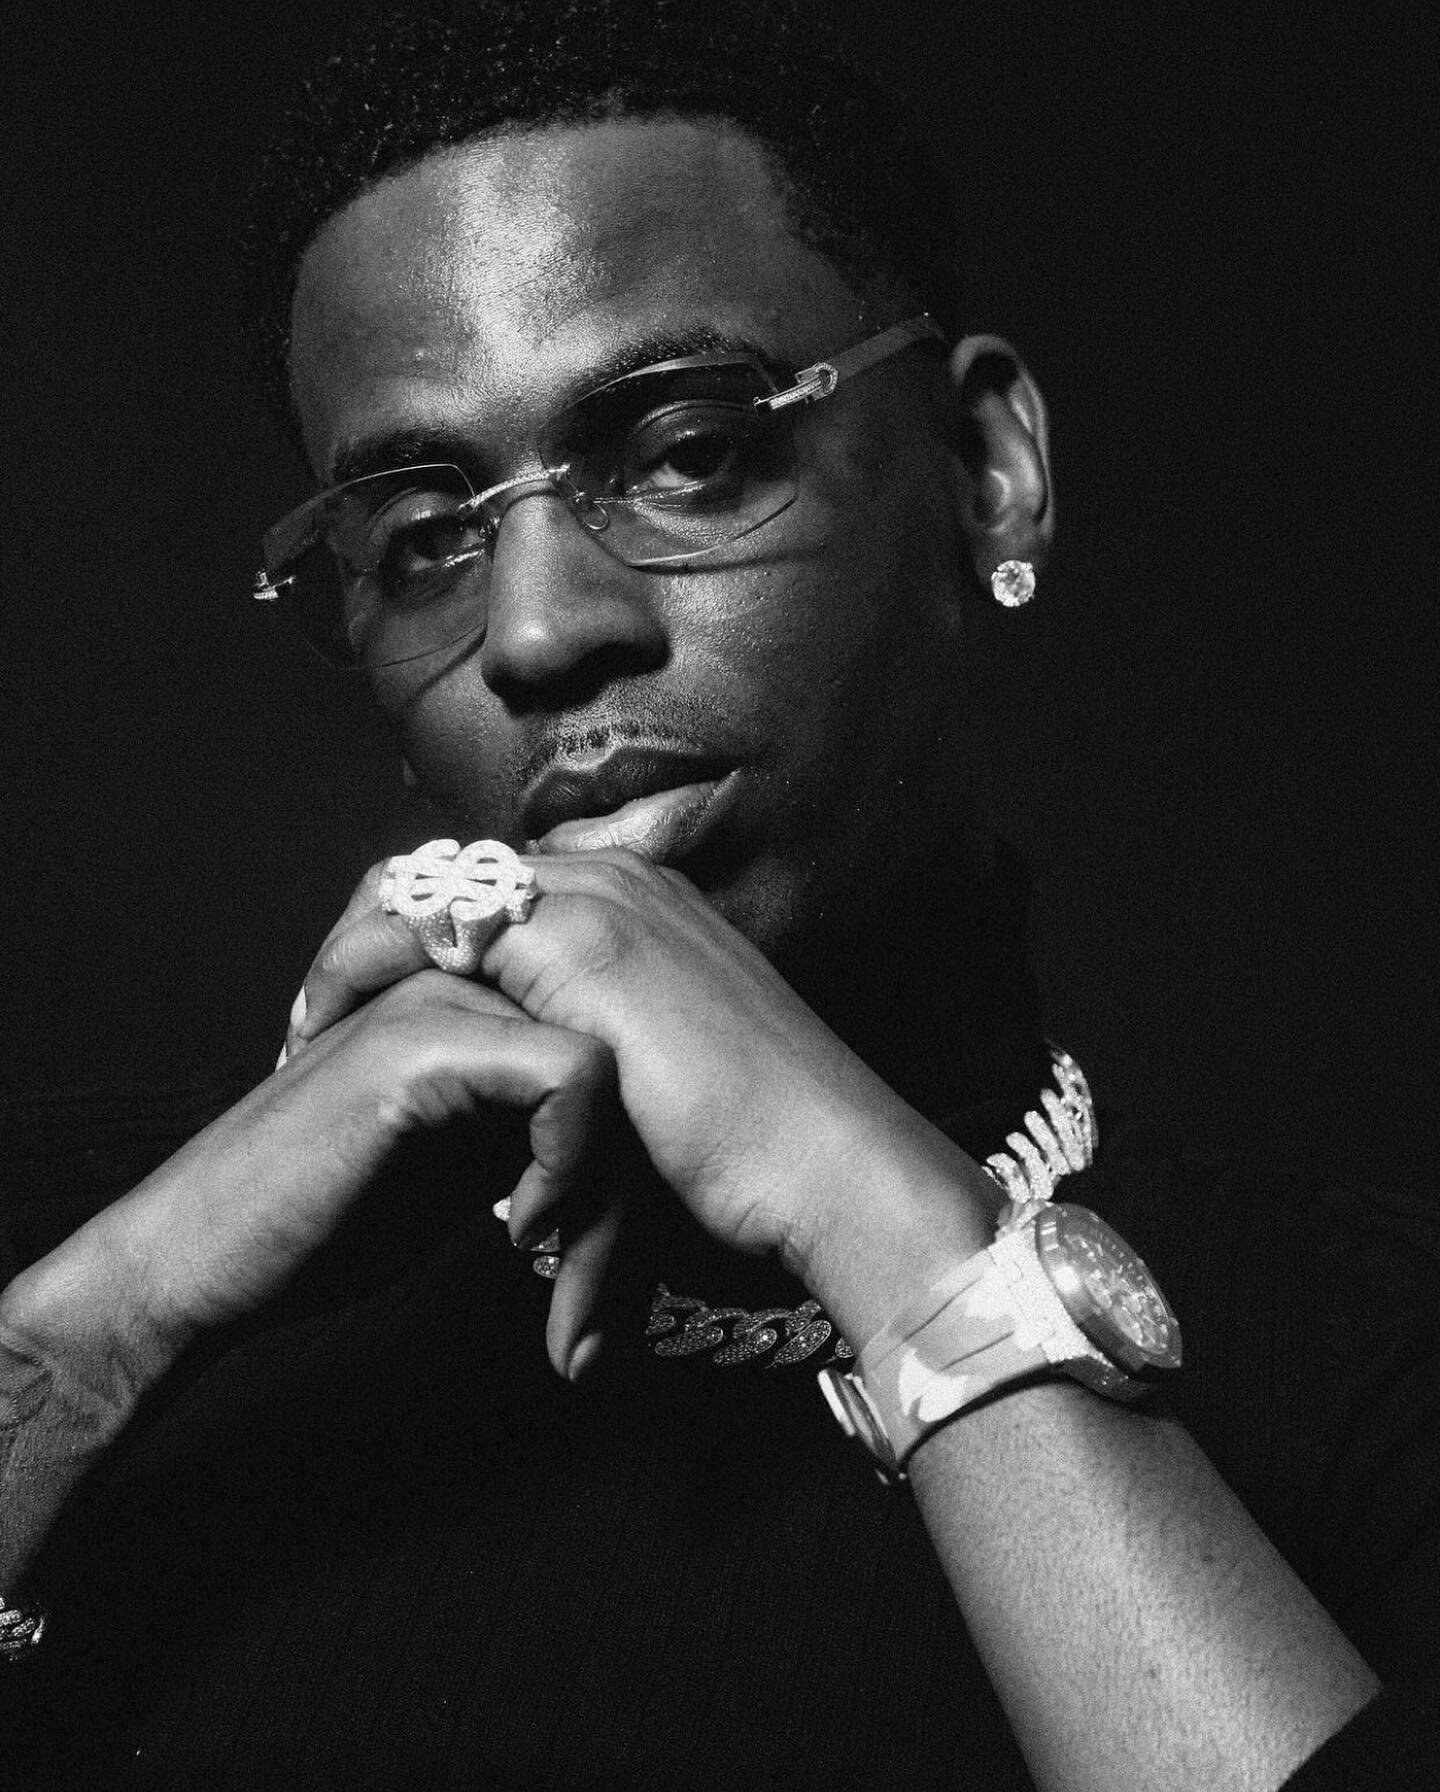 Rest In Peace, Young Dolph: to one my favorite rappers ~ Young Dolph

🖤 𝖞𝖓𝖌

#youngngrateful #youngdolph